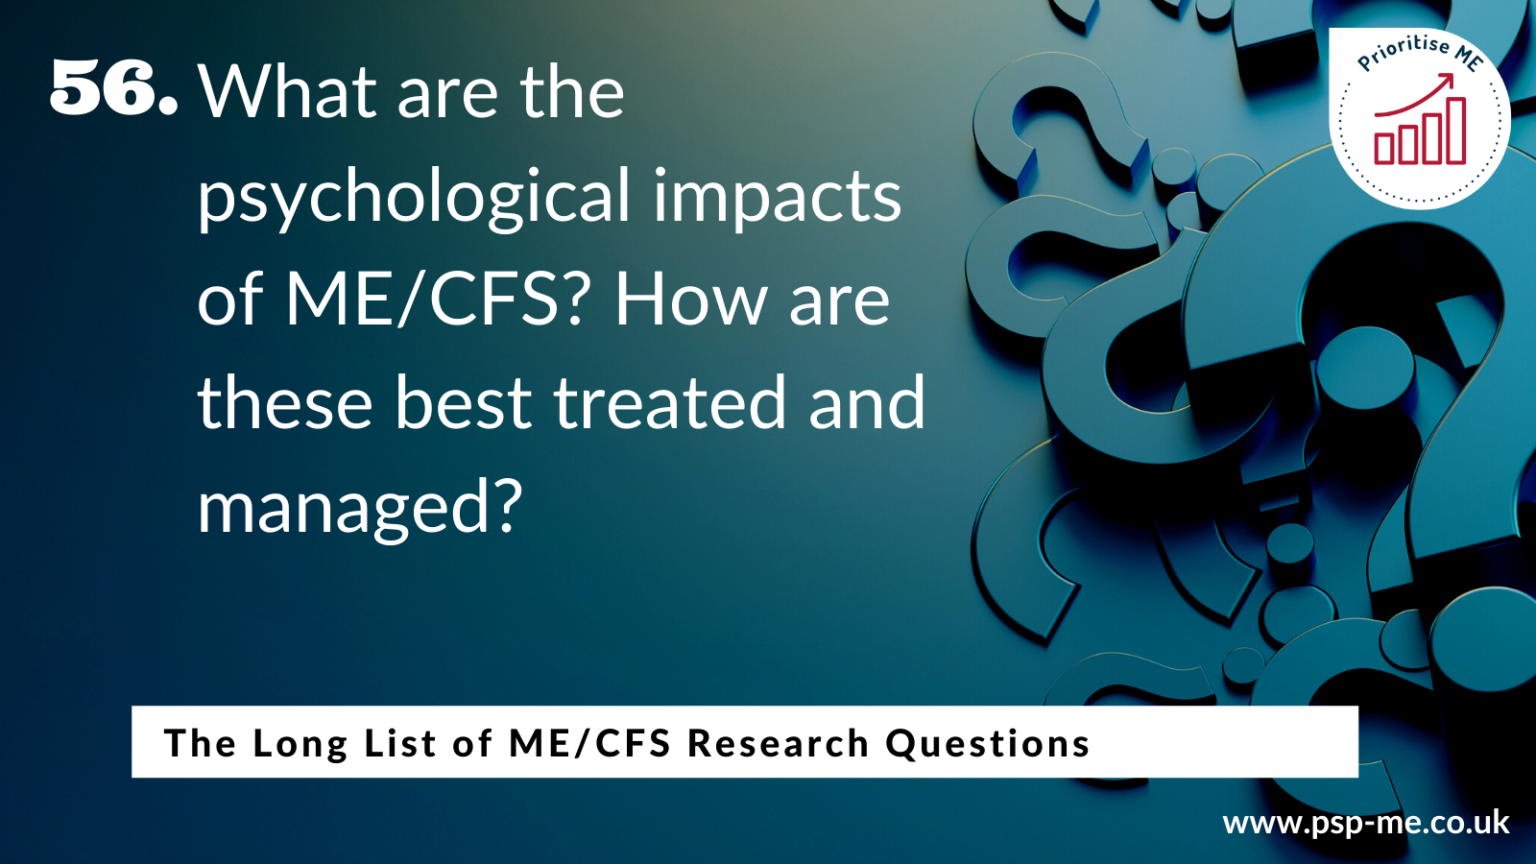 The Long List of ME_CFS Research Questions (56)